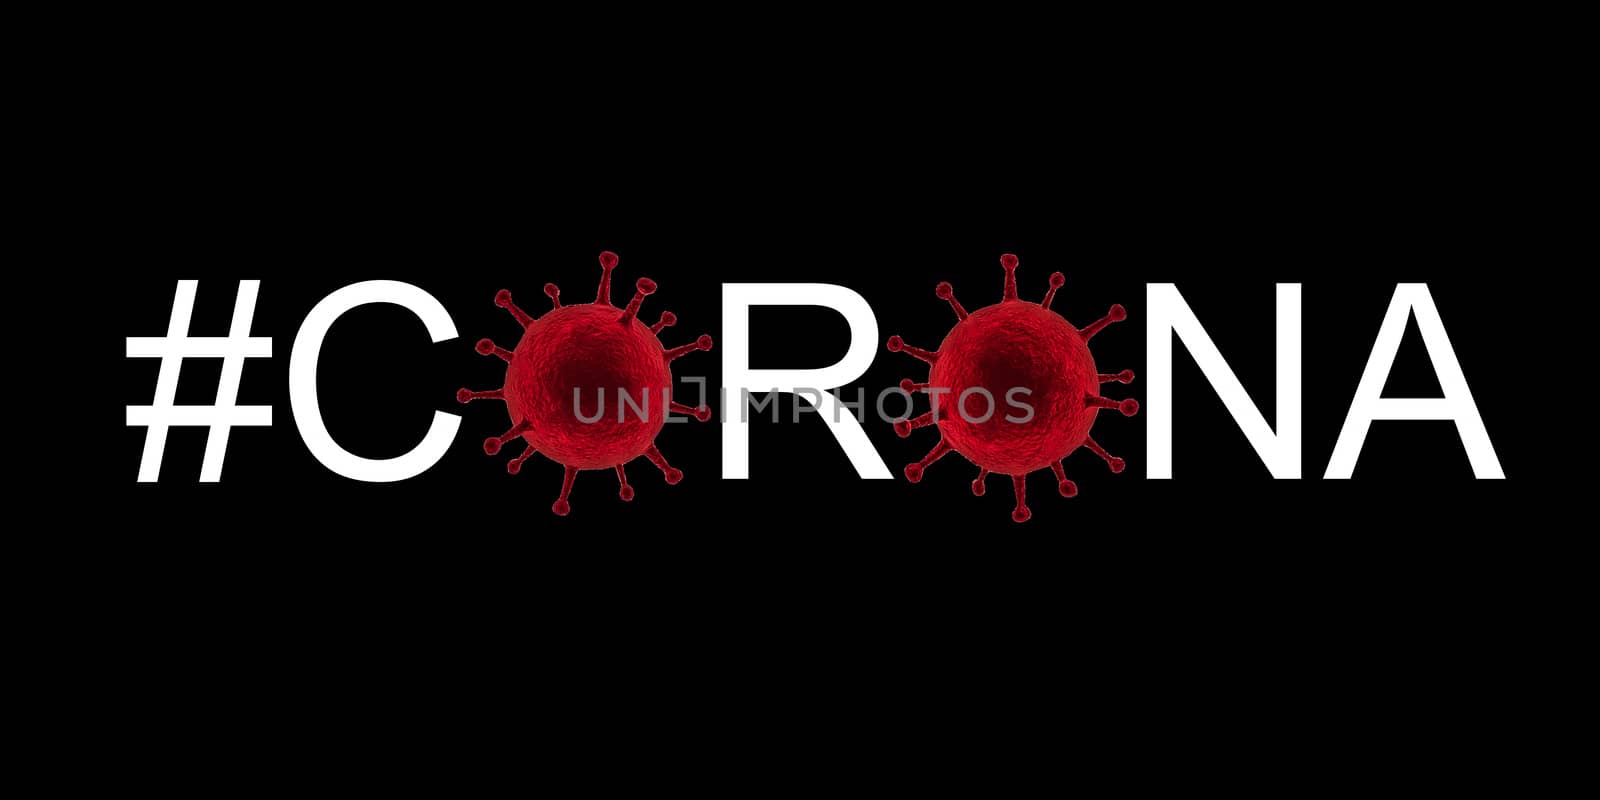 Chalkboard banner of corona virus tags in different colors by MP_foto71